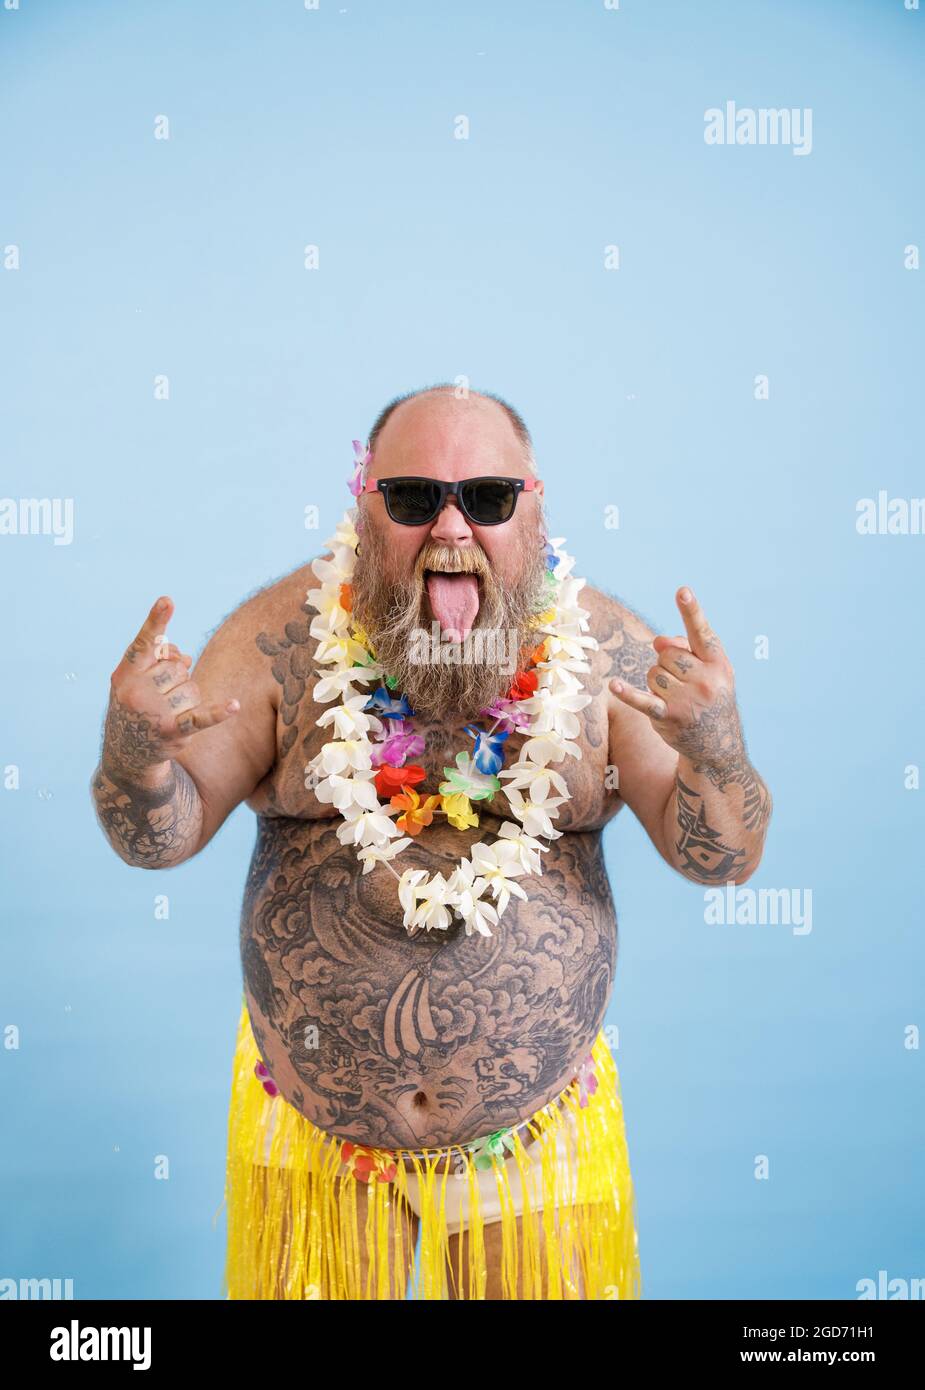 Funny man with overweight and flowers garland shows Horns gestures on light blue background Stock Photo